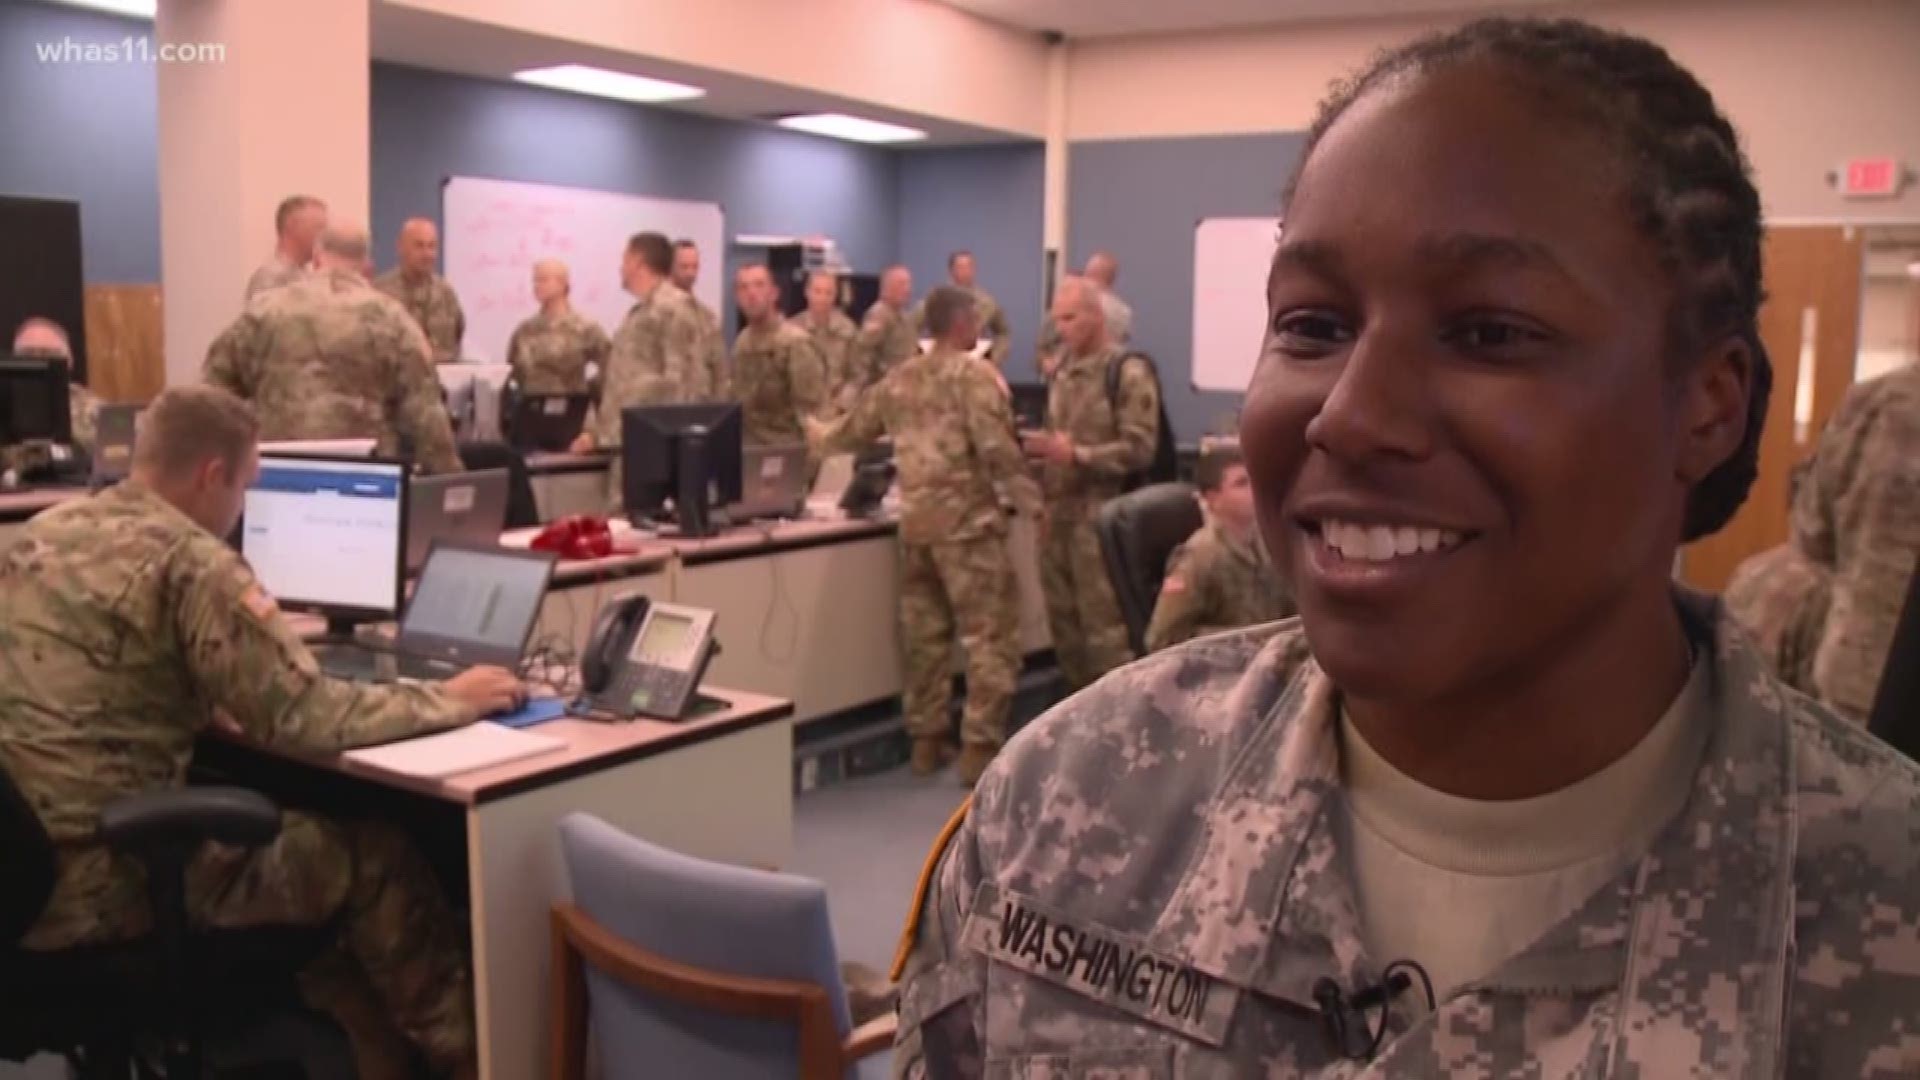 A member of the Kentucky Army National Guard, and native of North Carolina, was honored in front of her peers for her effort in Hurricane Florence aid.